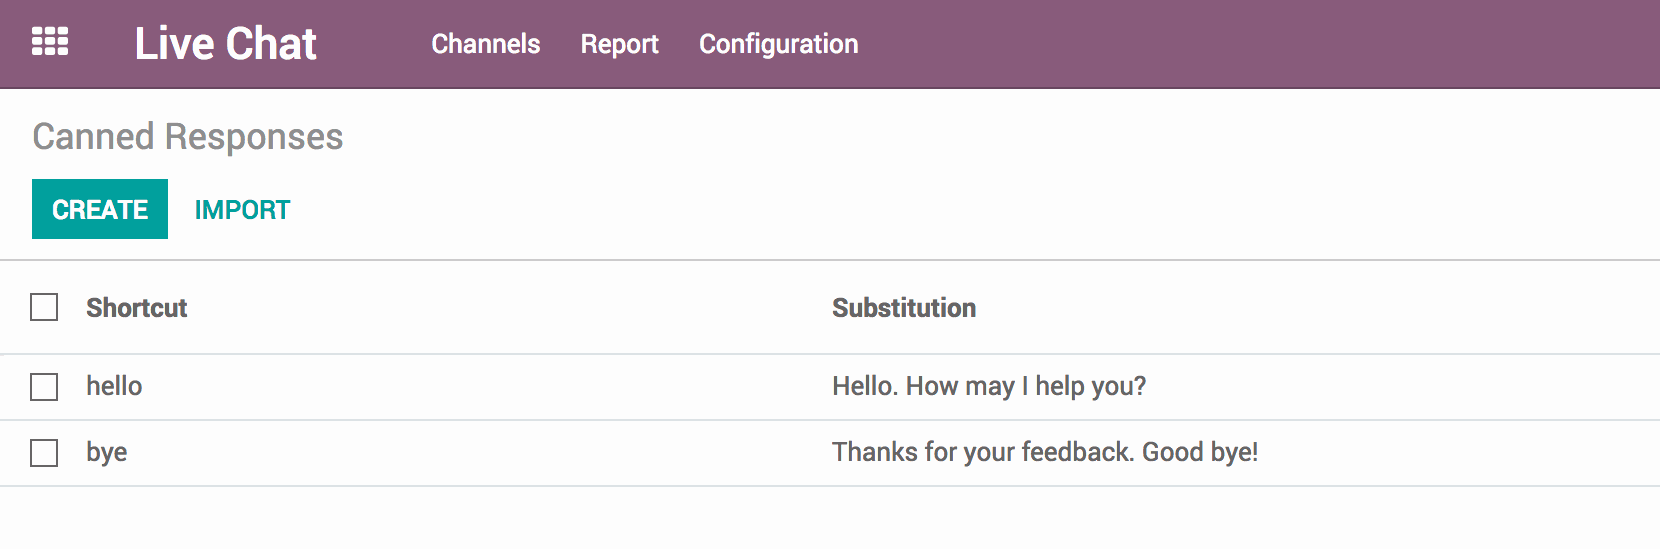 Odoo Live chat interface with a list of Canned Responses